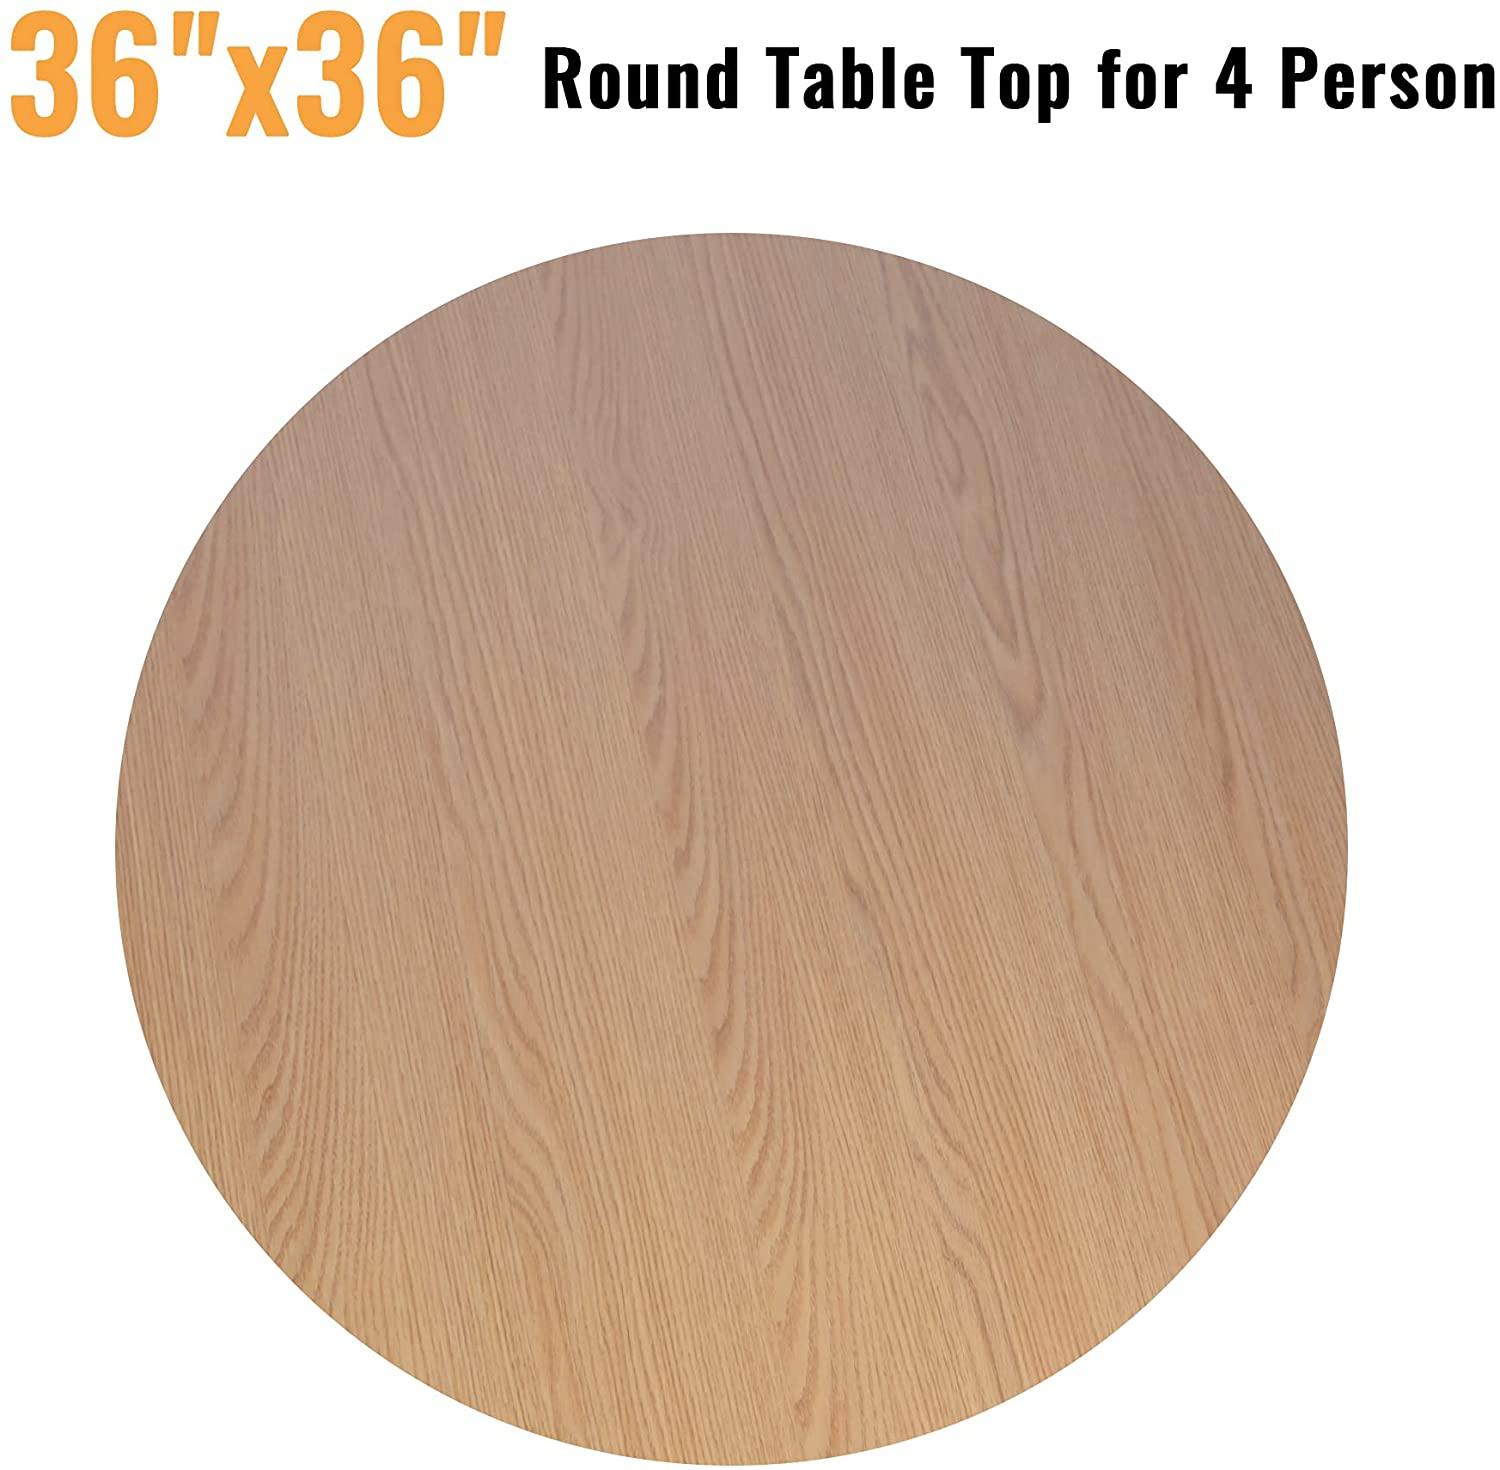 36" Round Dining Table Mid Century Modern Dining Table with Solid Metal Legs for Cafe/Bar, Kitchen, Dining, Office - Bosonshop